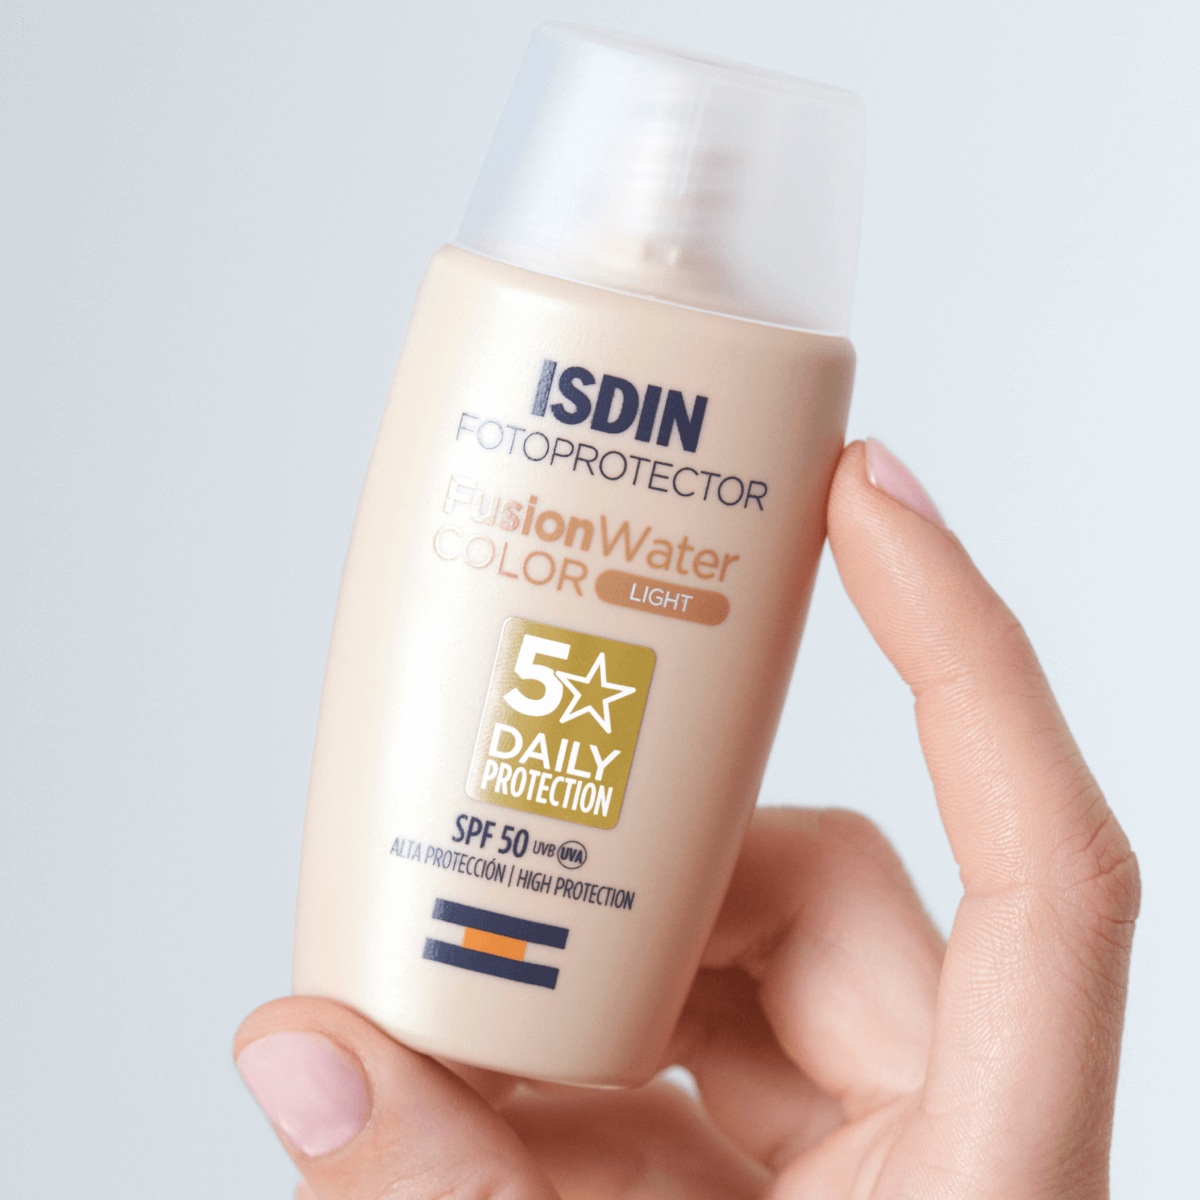 Fotoprotector ISDIN Fusion Water Color Light SPF 50 | ISDIN